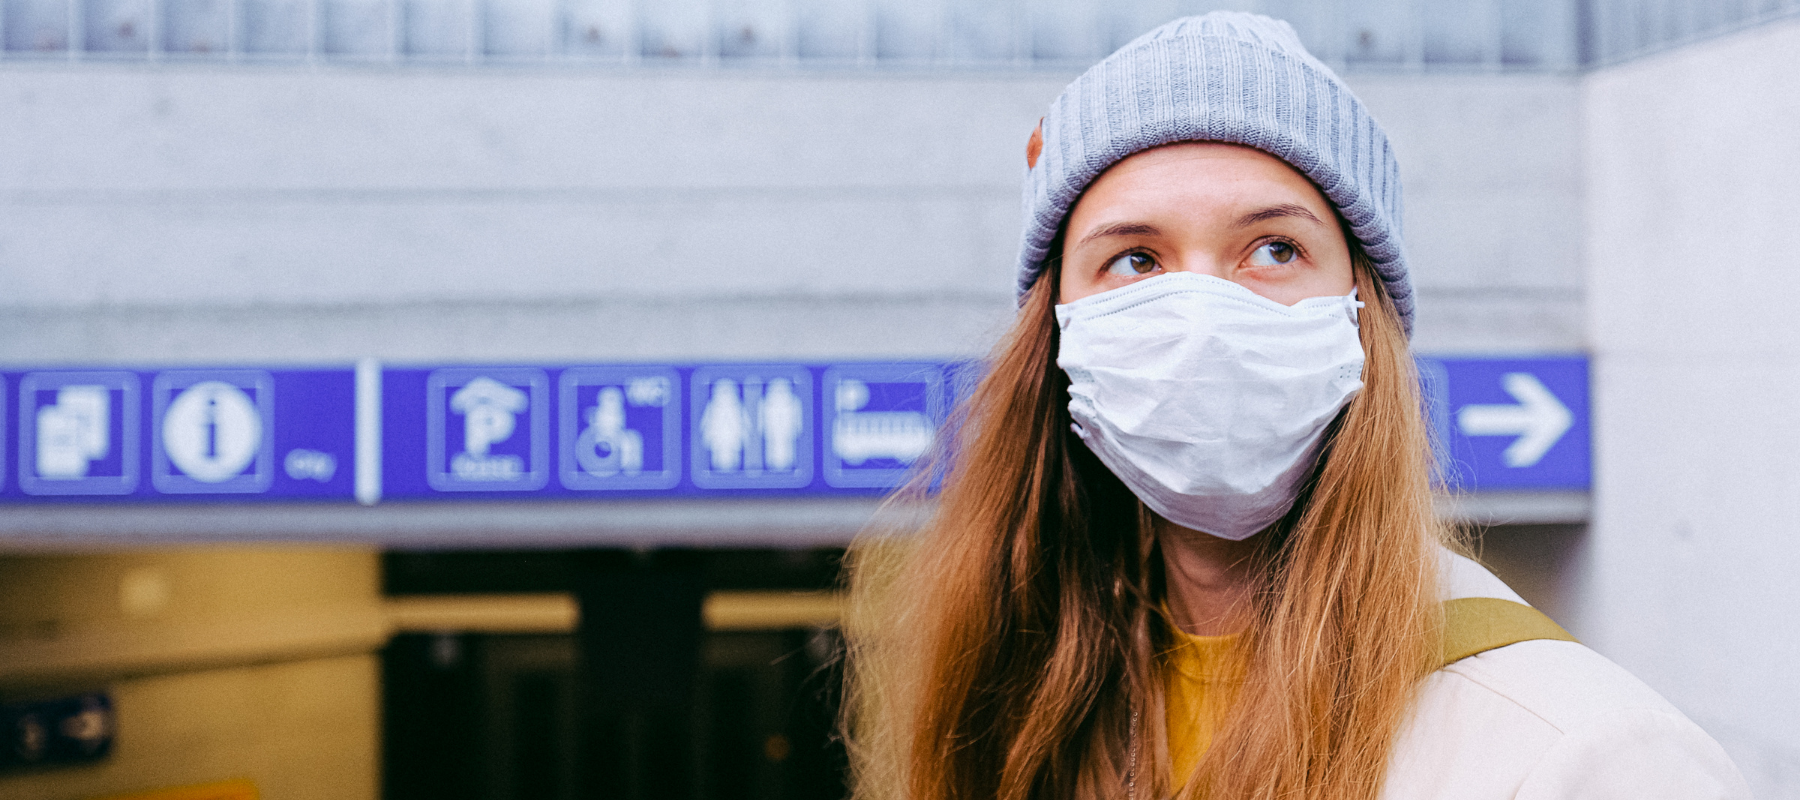 woman suffering from migraine wearing mask in front of hospital